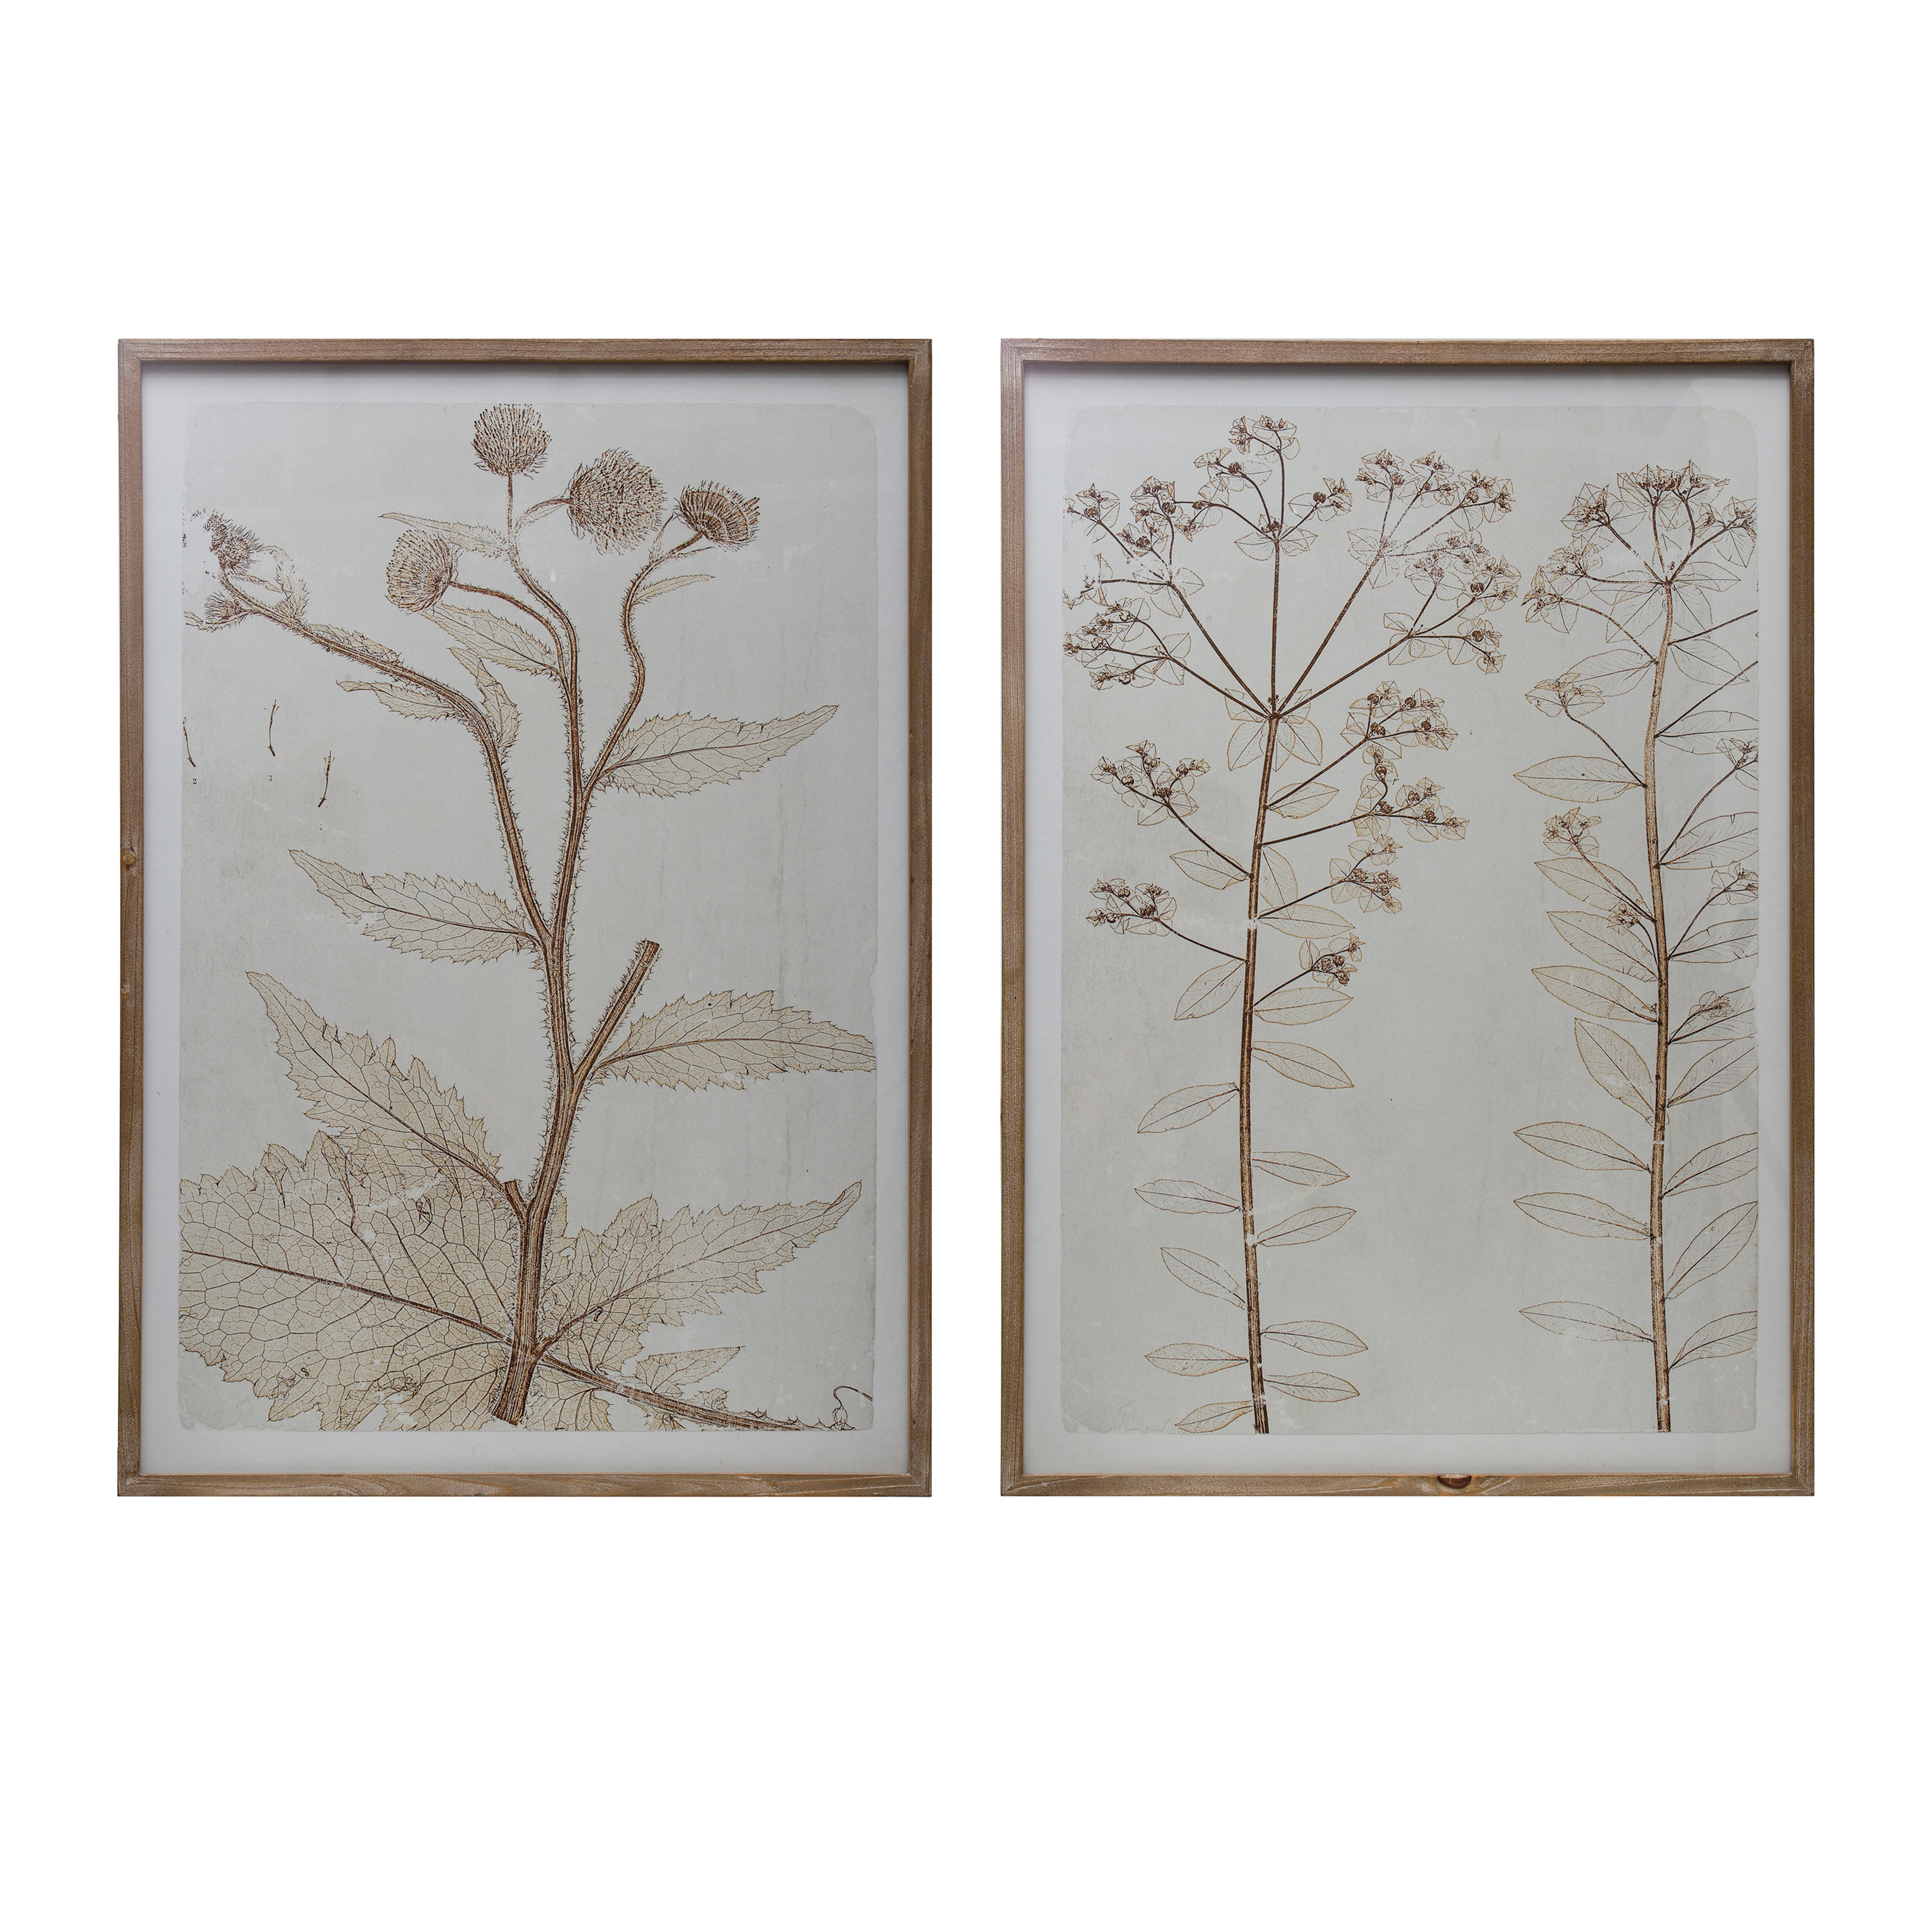  Floral Print Wall Décor with Wood Frame and Glass Cover, Set of 2 Styles - Image 0